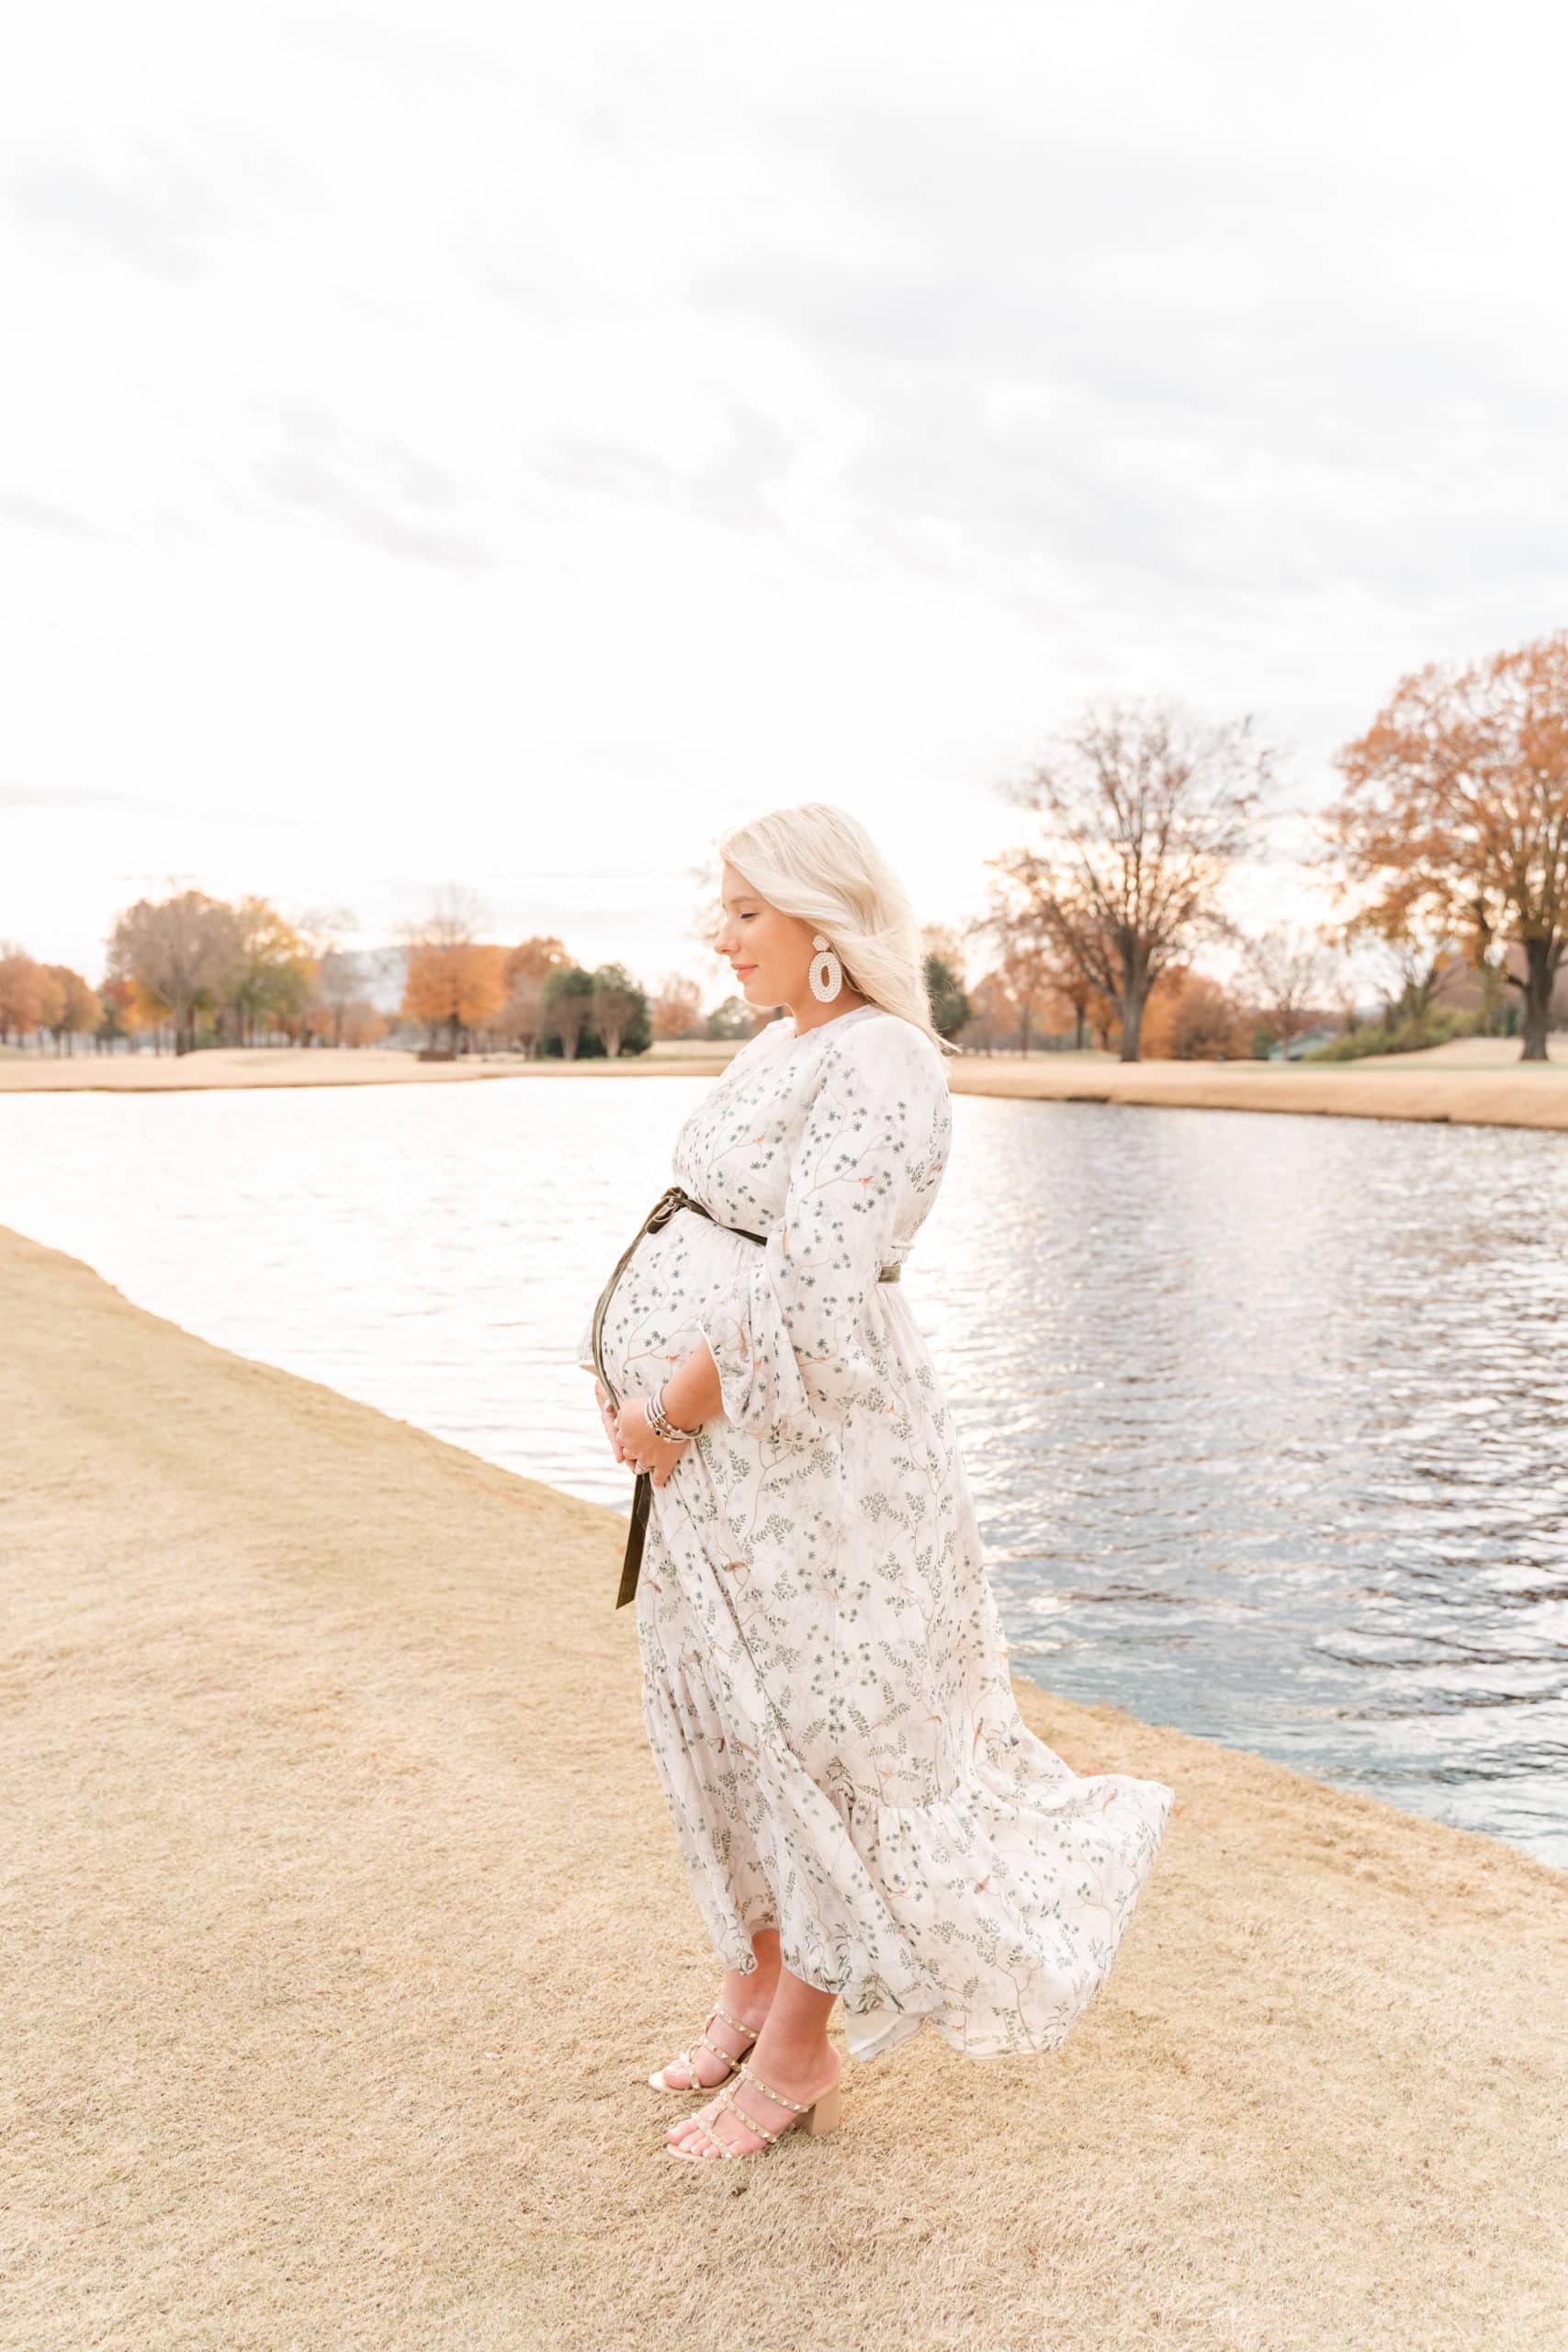 Maternity session on golf course in Chattanooga TN by Tennessee River. When to schedule maternity photos?